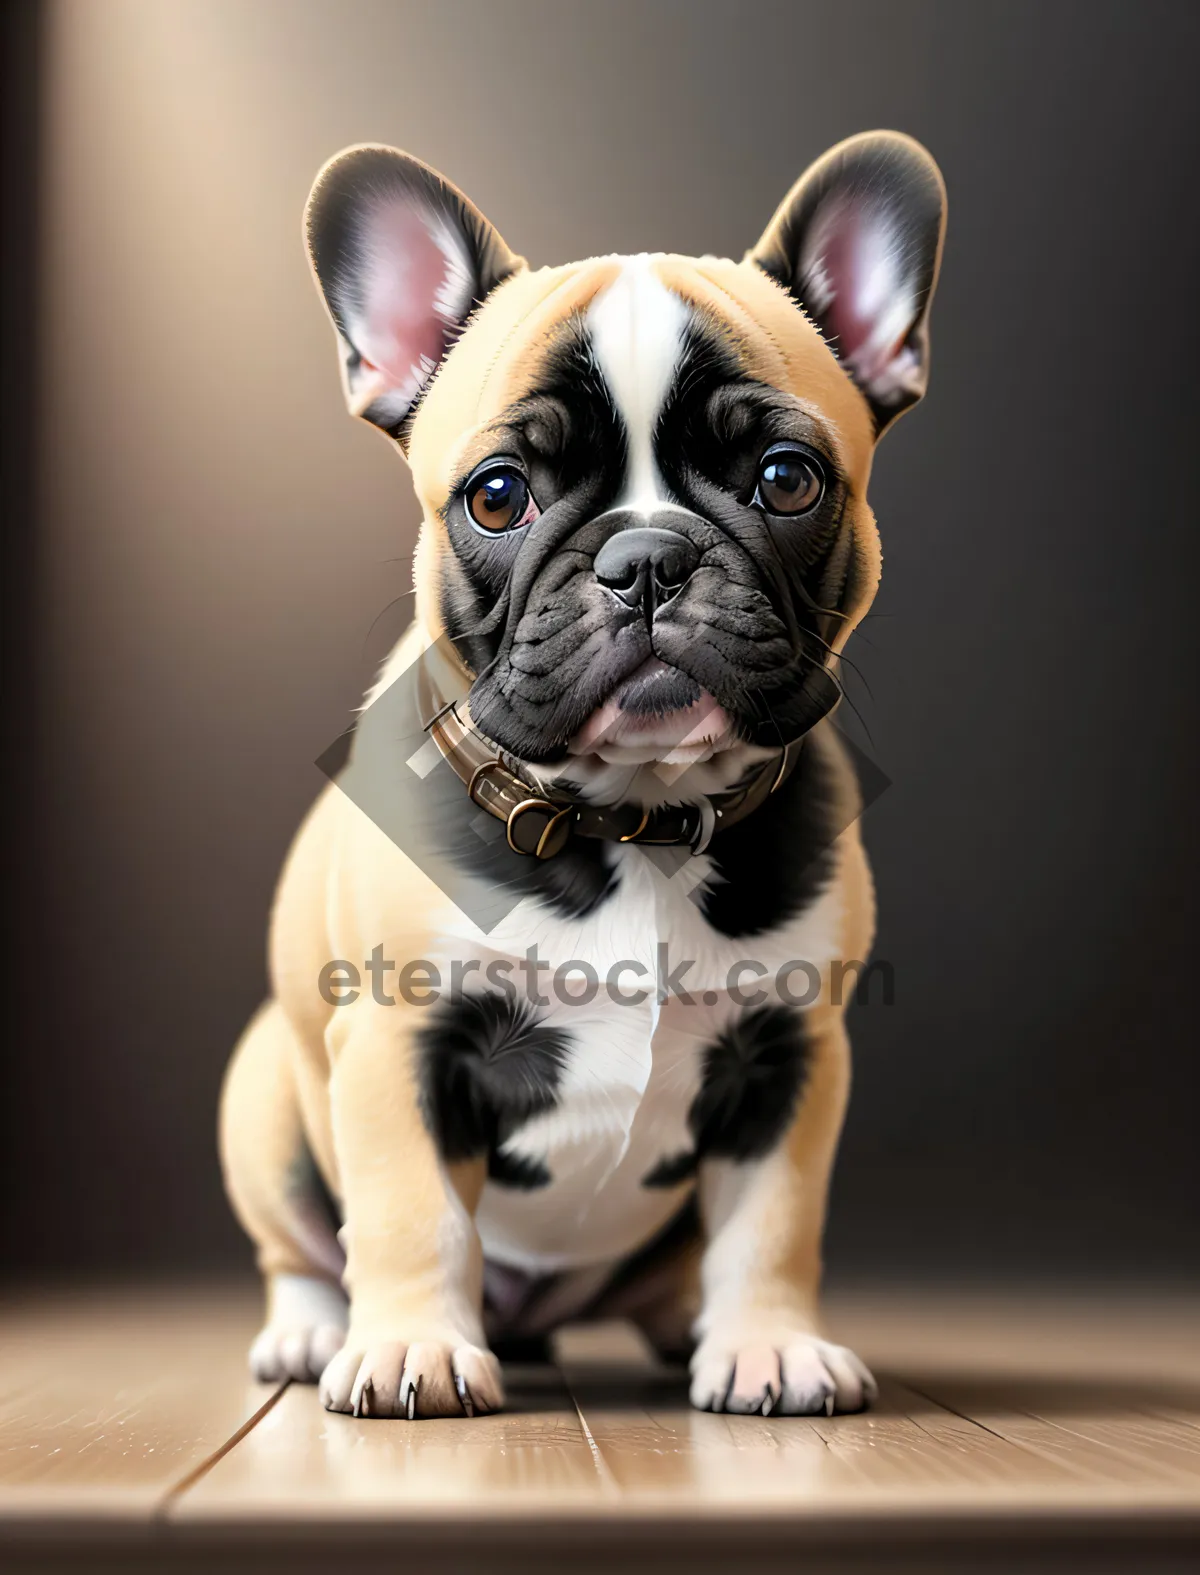 Picture of Seated gracefully in a studio, a cute bulldog puppy with adorable wrinkles steals the spotlight